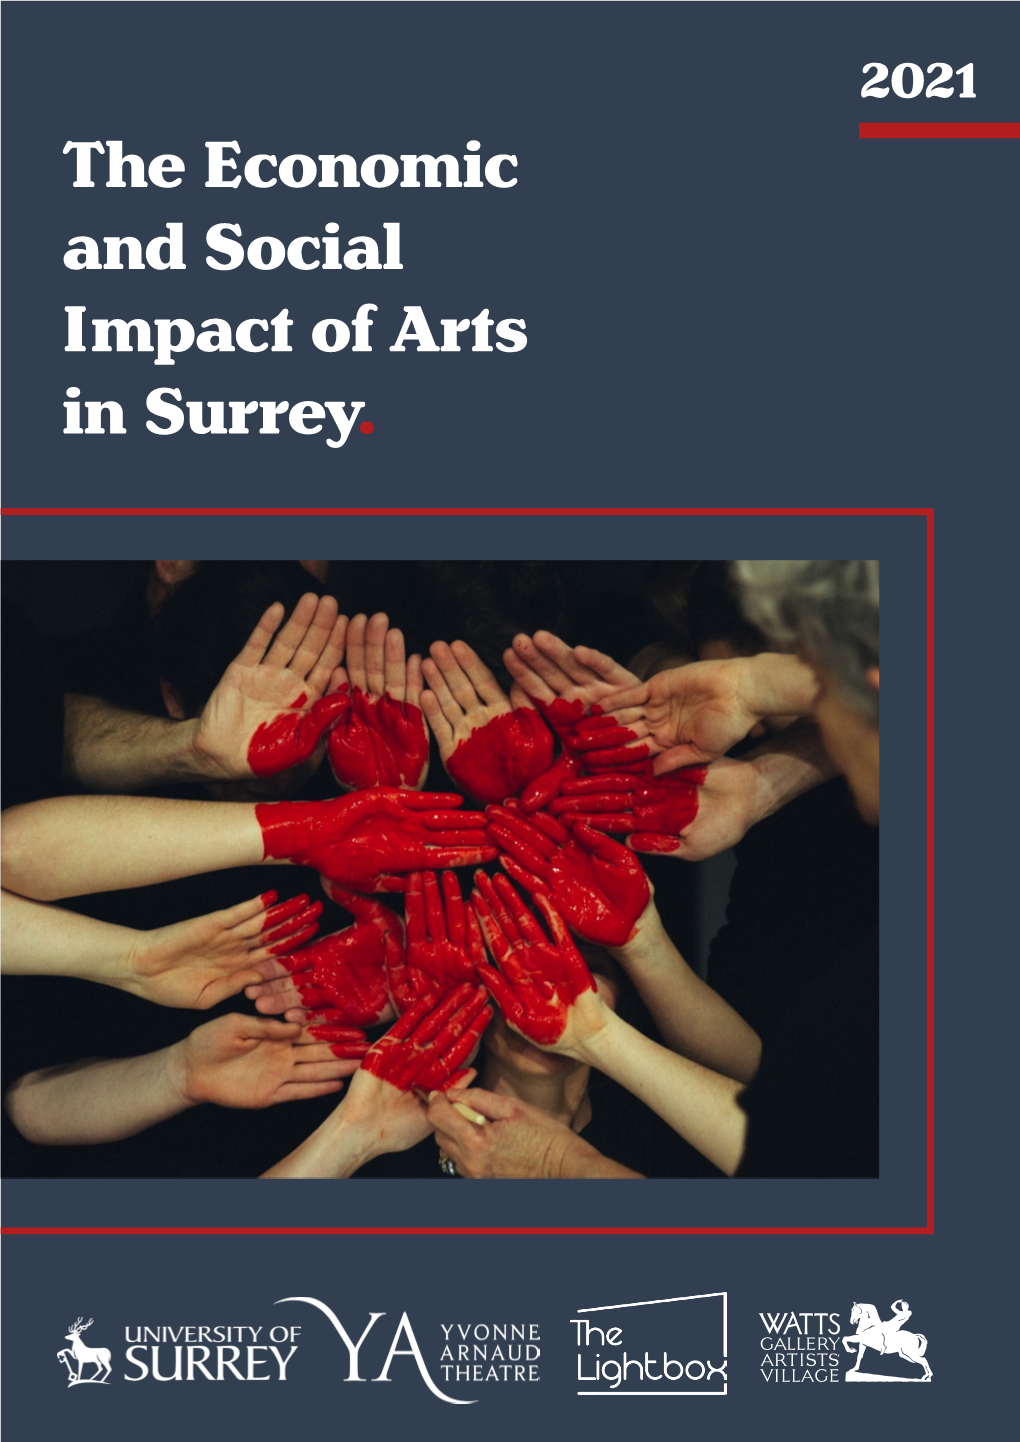 The Economic and Social Impact of Arts in Surrey